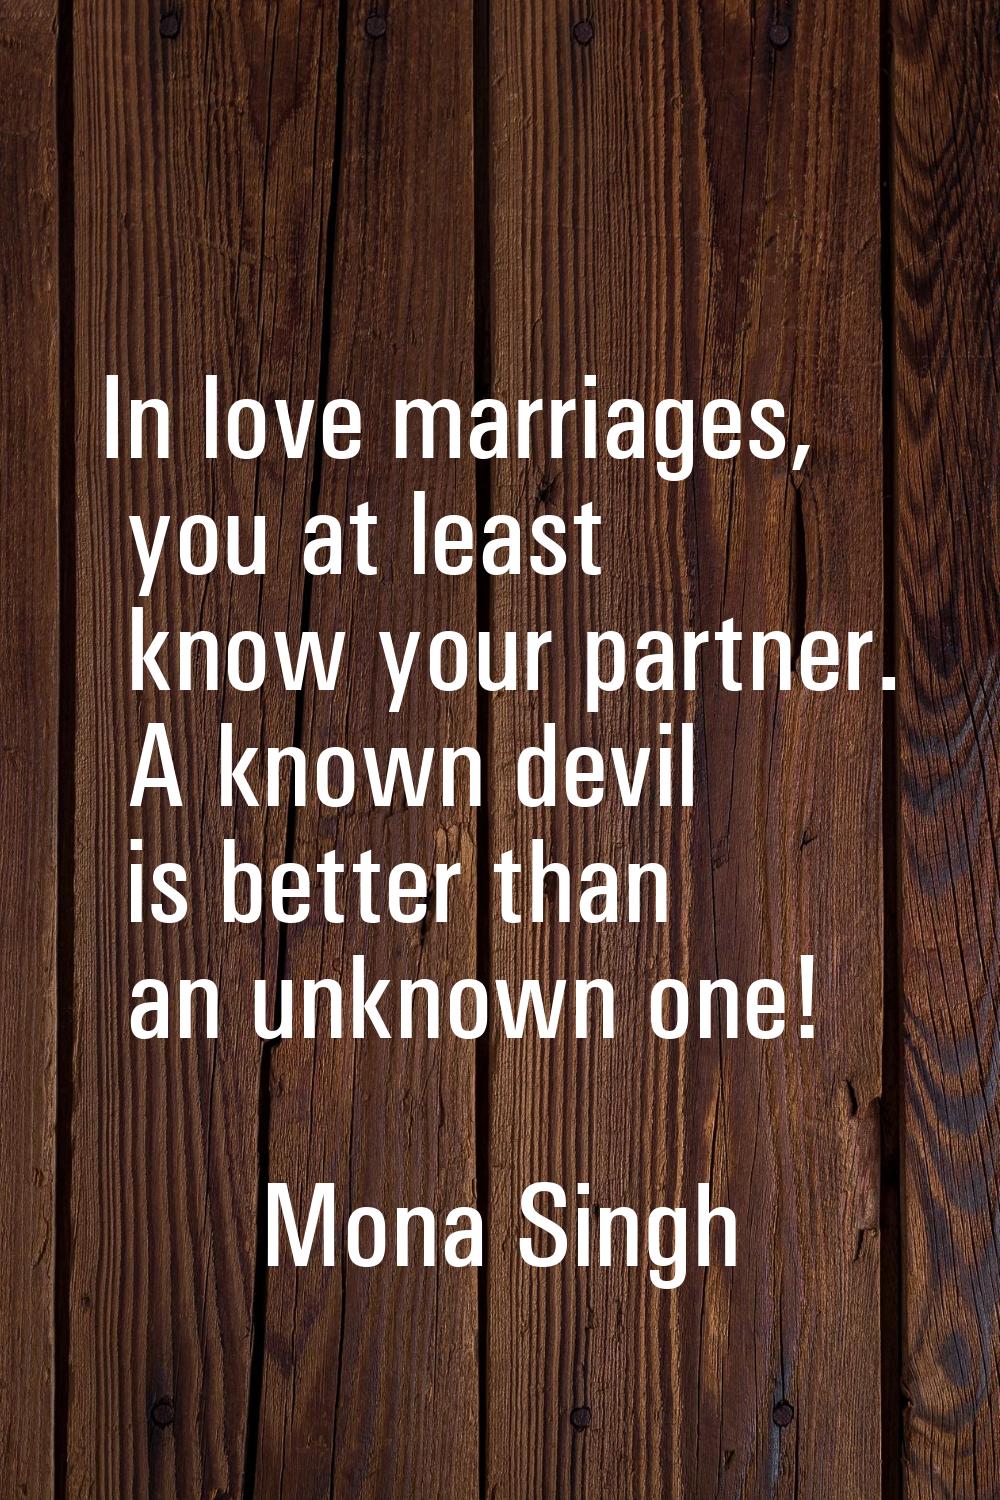 In love marriages, you at least know your partner. A known devil is better than an unknown one!